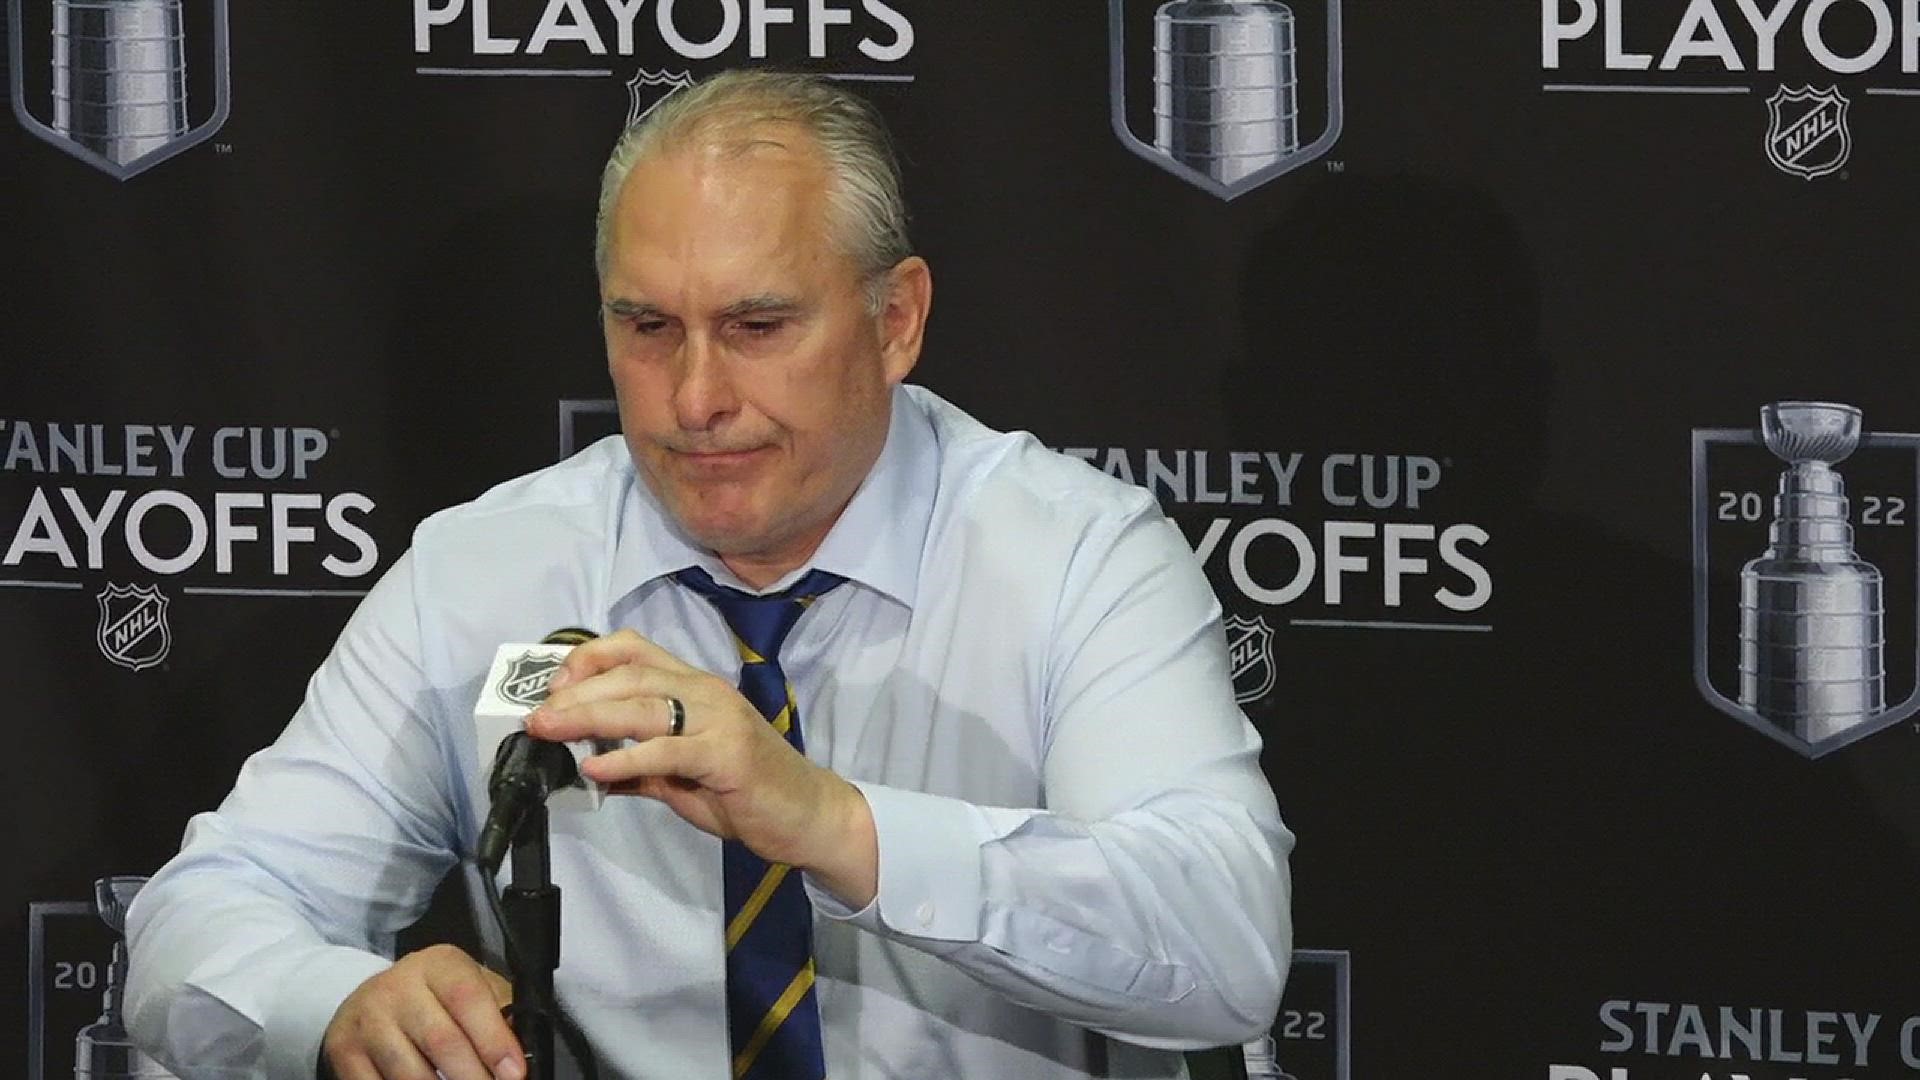 St. Louis Blues head coach Craig Berube talks about beating out the Minnesota Wild in Game 5 of the NHL playoff series. The Blues could take the series at home 5/12.